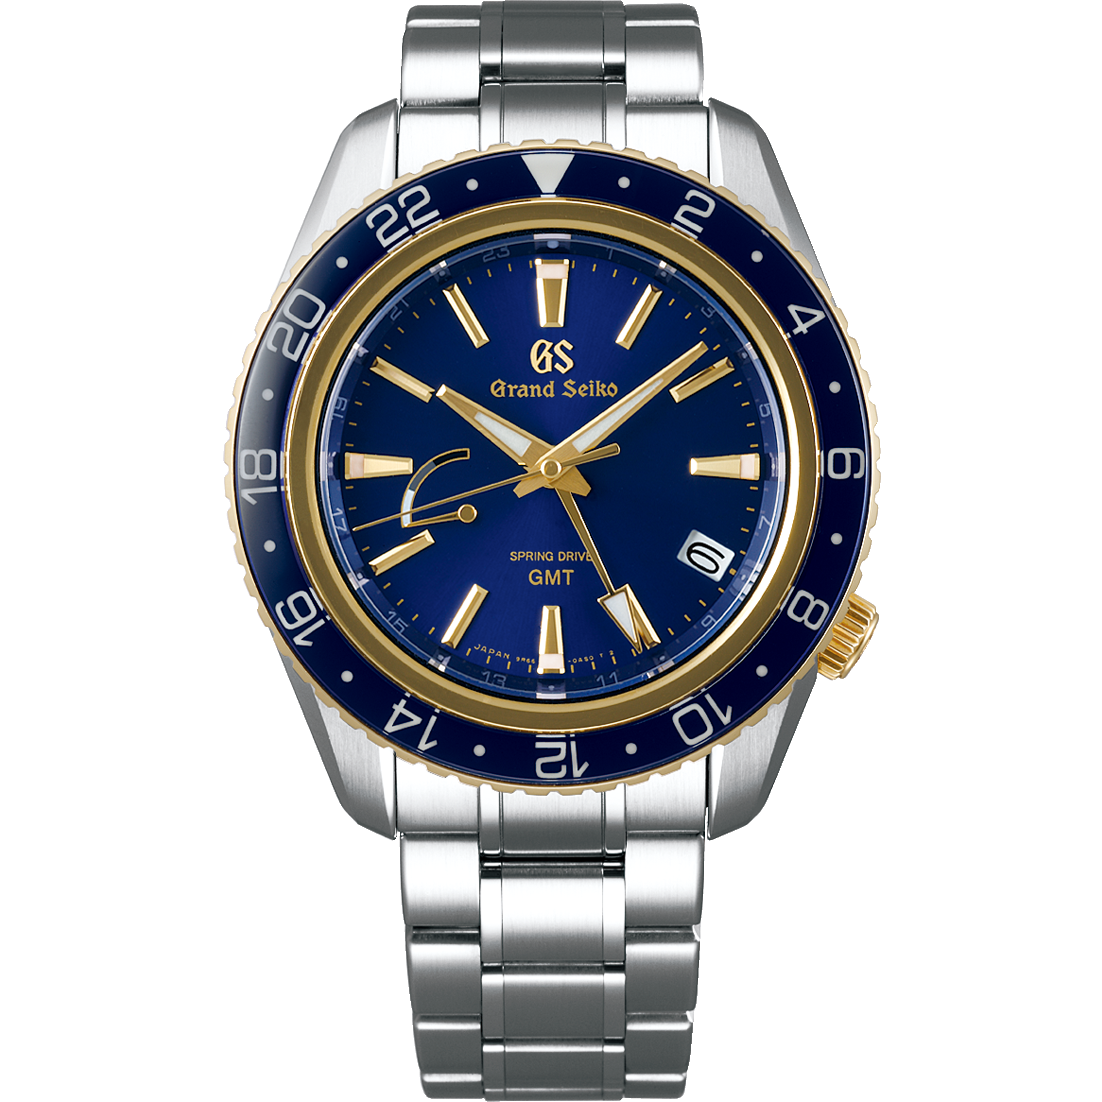 Grand Seiko SBGE248 Spring Drive GMT blue dial stainless steel 18k yellow gold men's watches